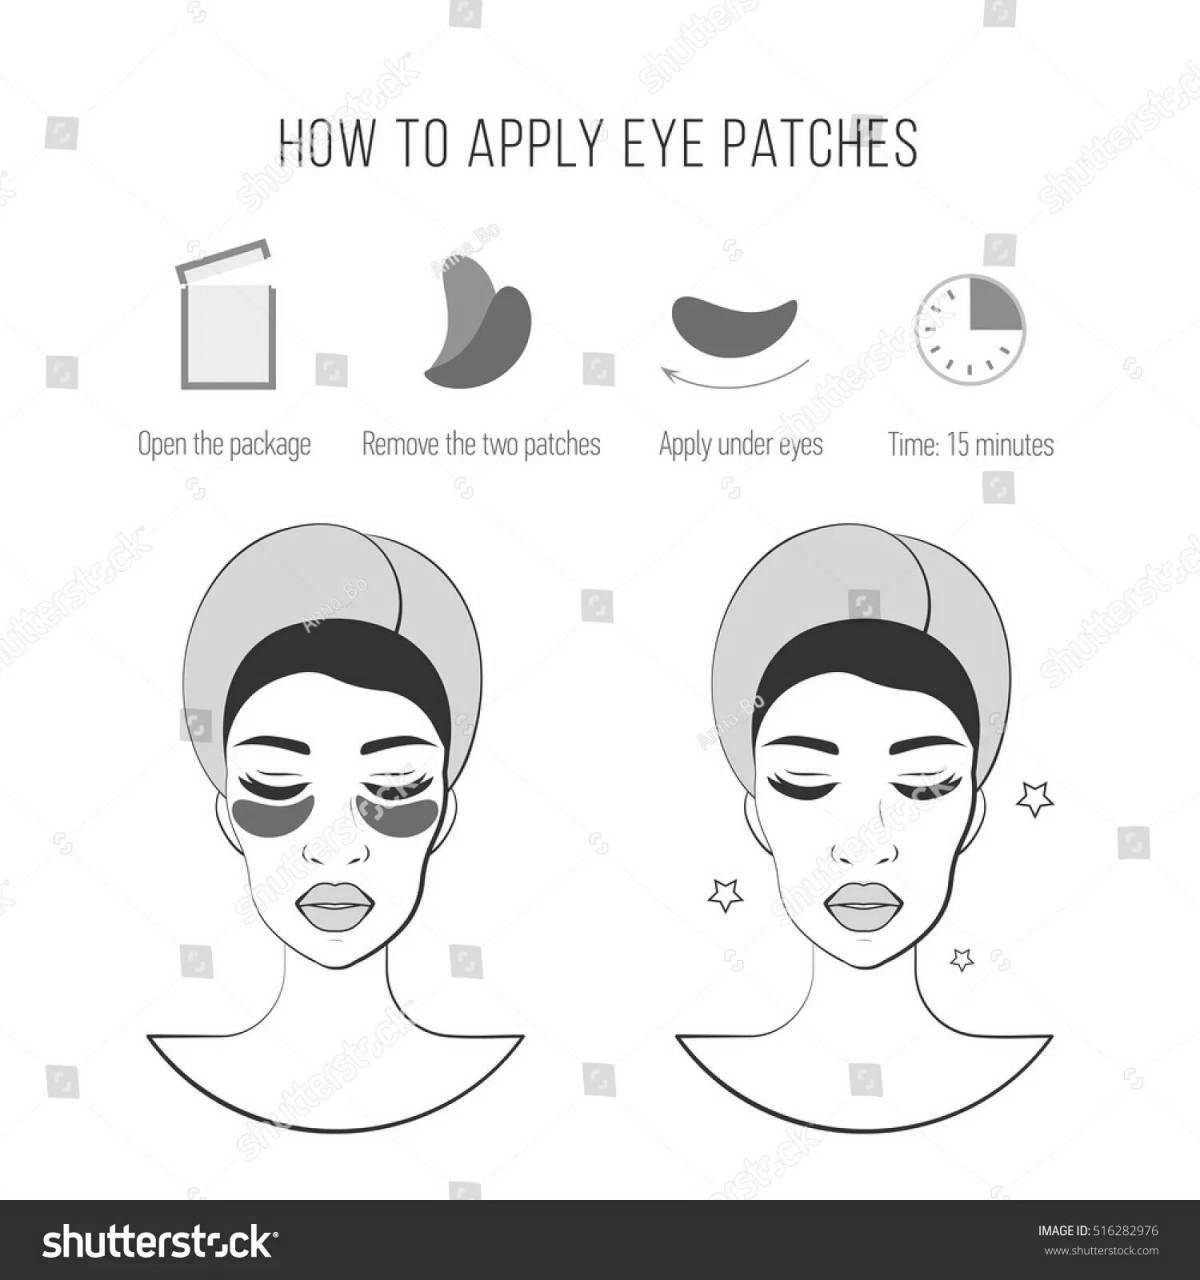 Eye patches #8